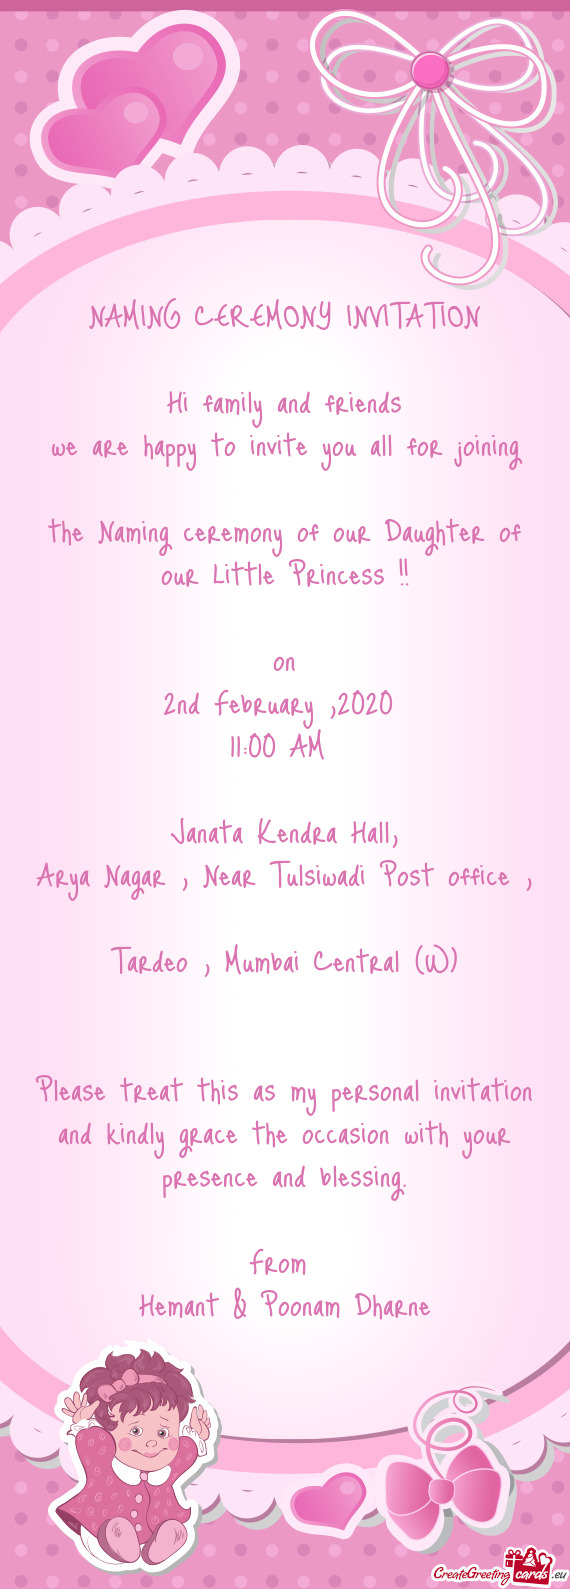 The Naming ceremony of our Daughter of